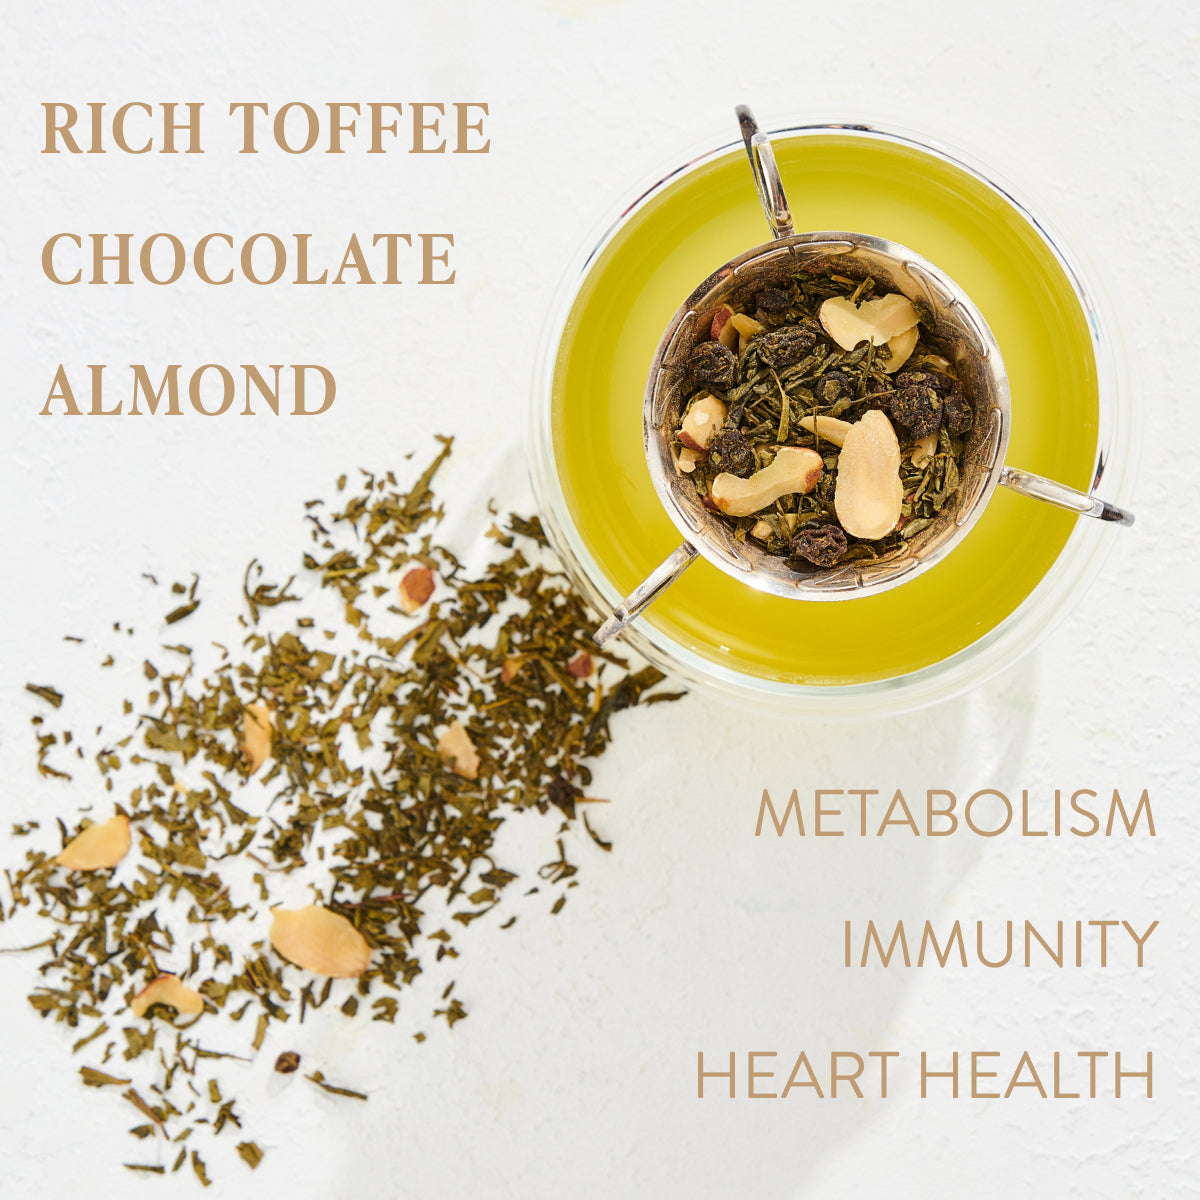 A glass cup of tea with a metal infuser containing organic tea leaves and almond slices. Loose leaf tea and almond slices are scattered on the white surface. Text on the left reads "Almond Matcha Green Tea for Joy - Traveler Jar" and on the right "METABOLISM IMMUNITY HEART HEALTH." Enjoy your Magic Hour moment.